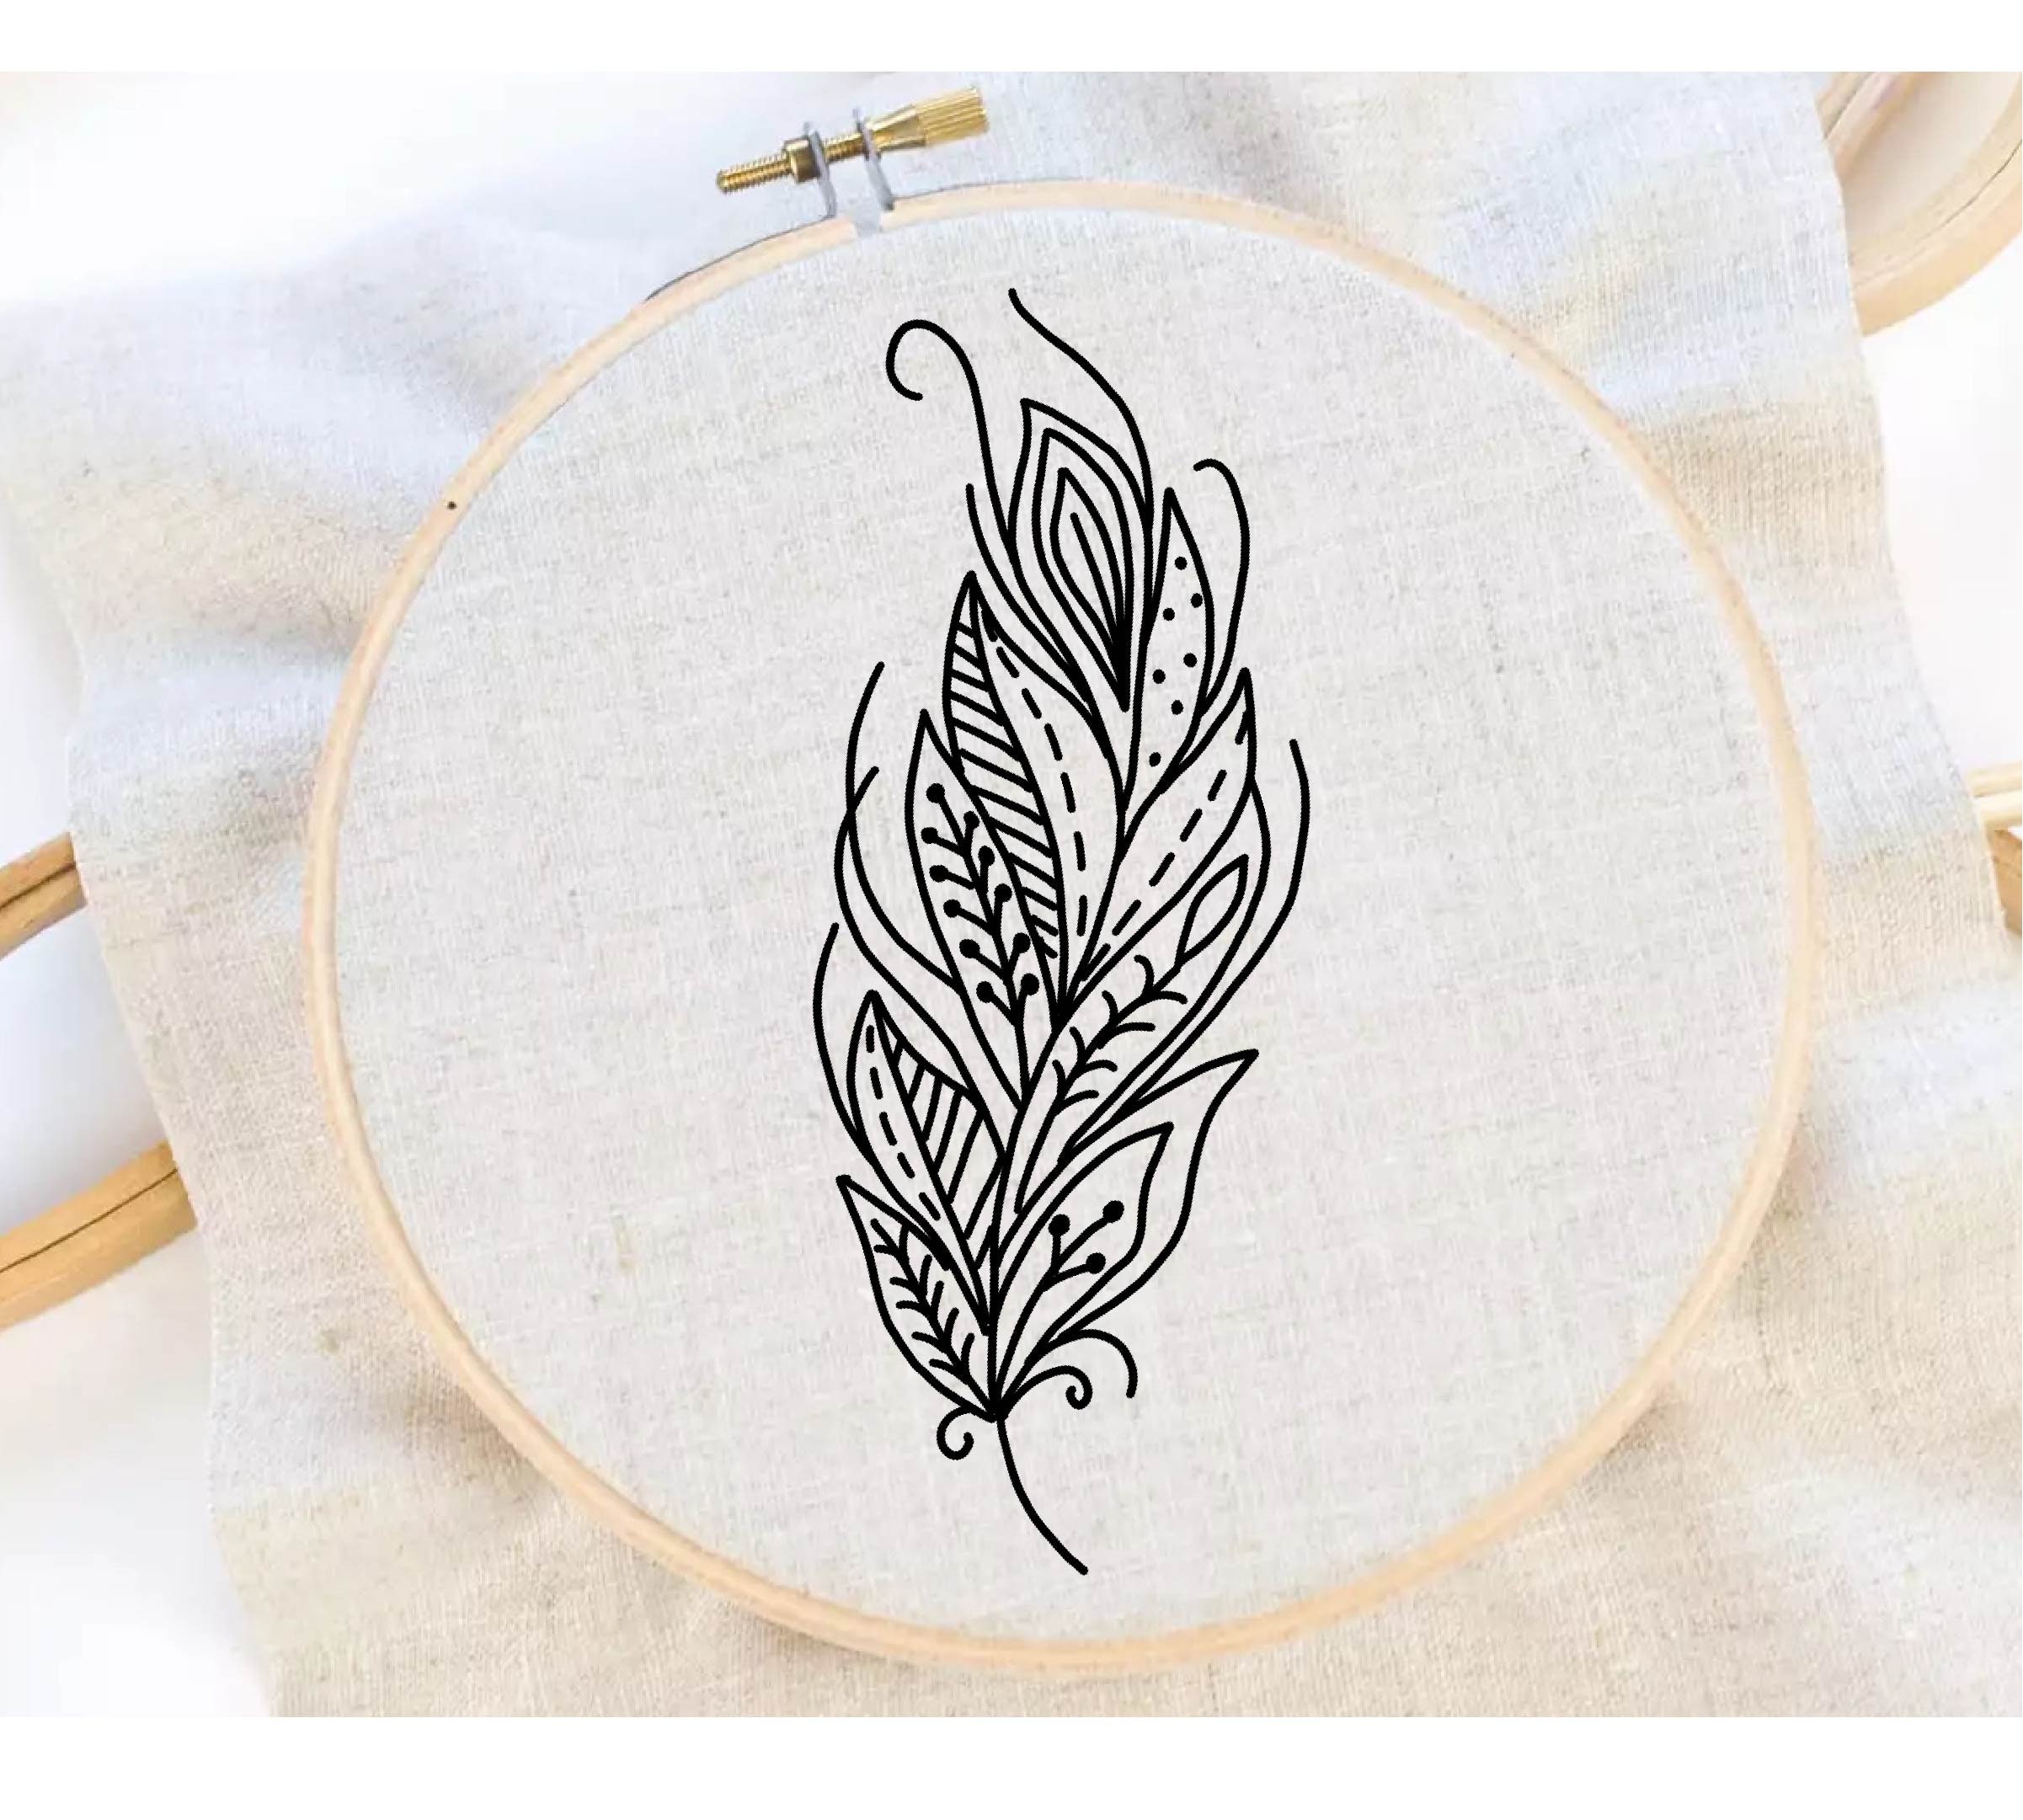 Feathers Embroidery Pattern Feather Art Embroidery Sampler Hand Embroidery  Pattern Boho Embroidery PDF Instant Download -  Canada